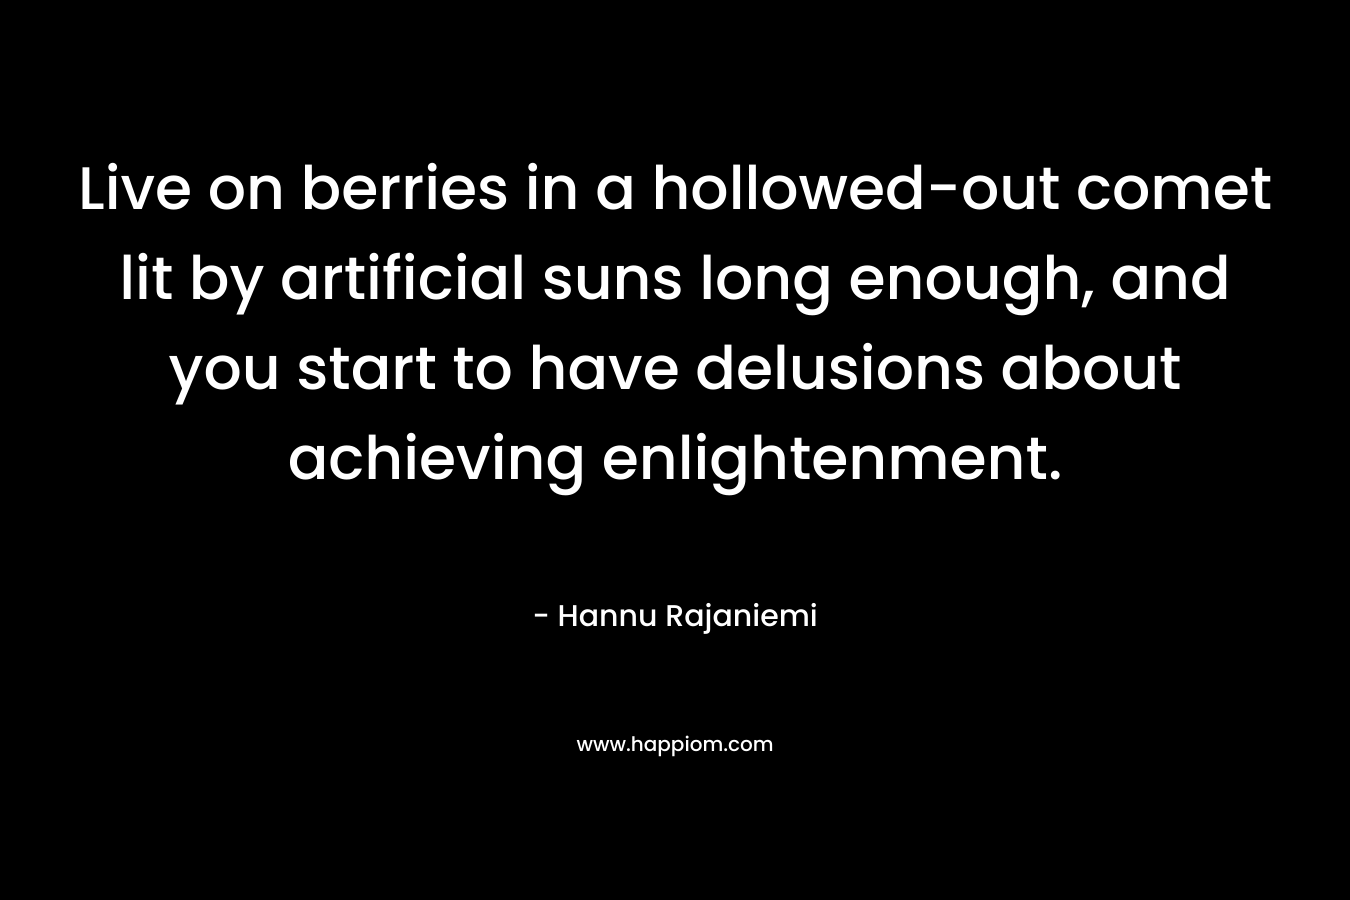 Live on berries in a hollowed-out comet lit by artificial suns long enough, and you start to have delusions about achieving enlightenment. – Hannu Rajaniemi